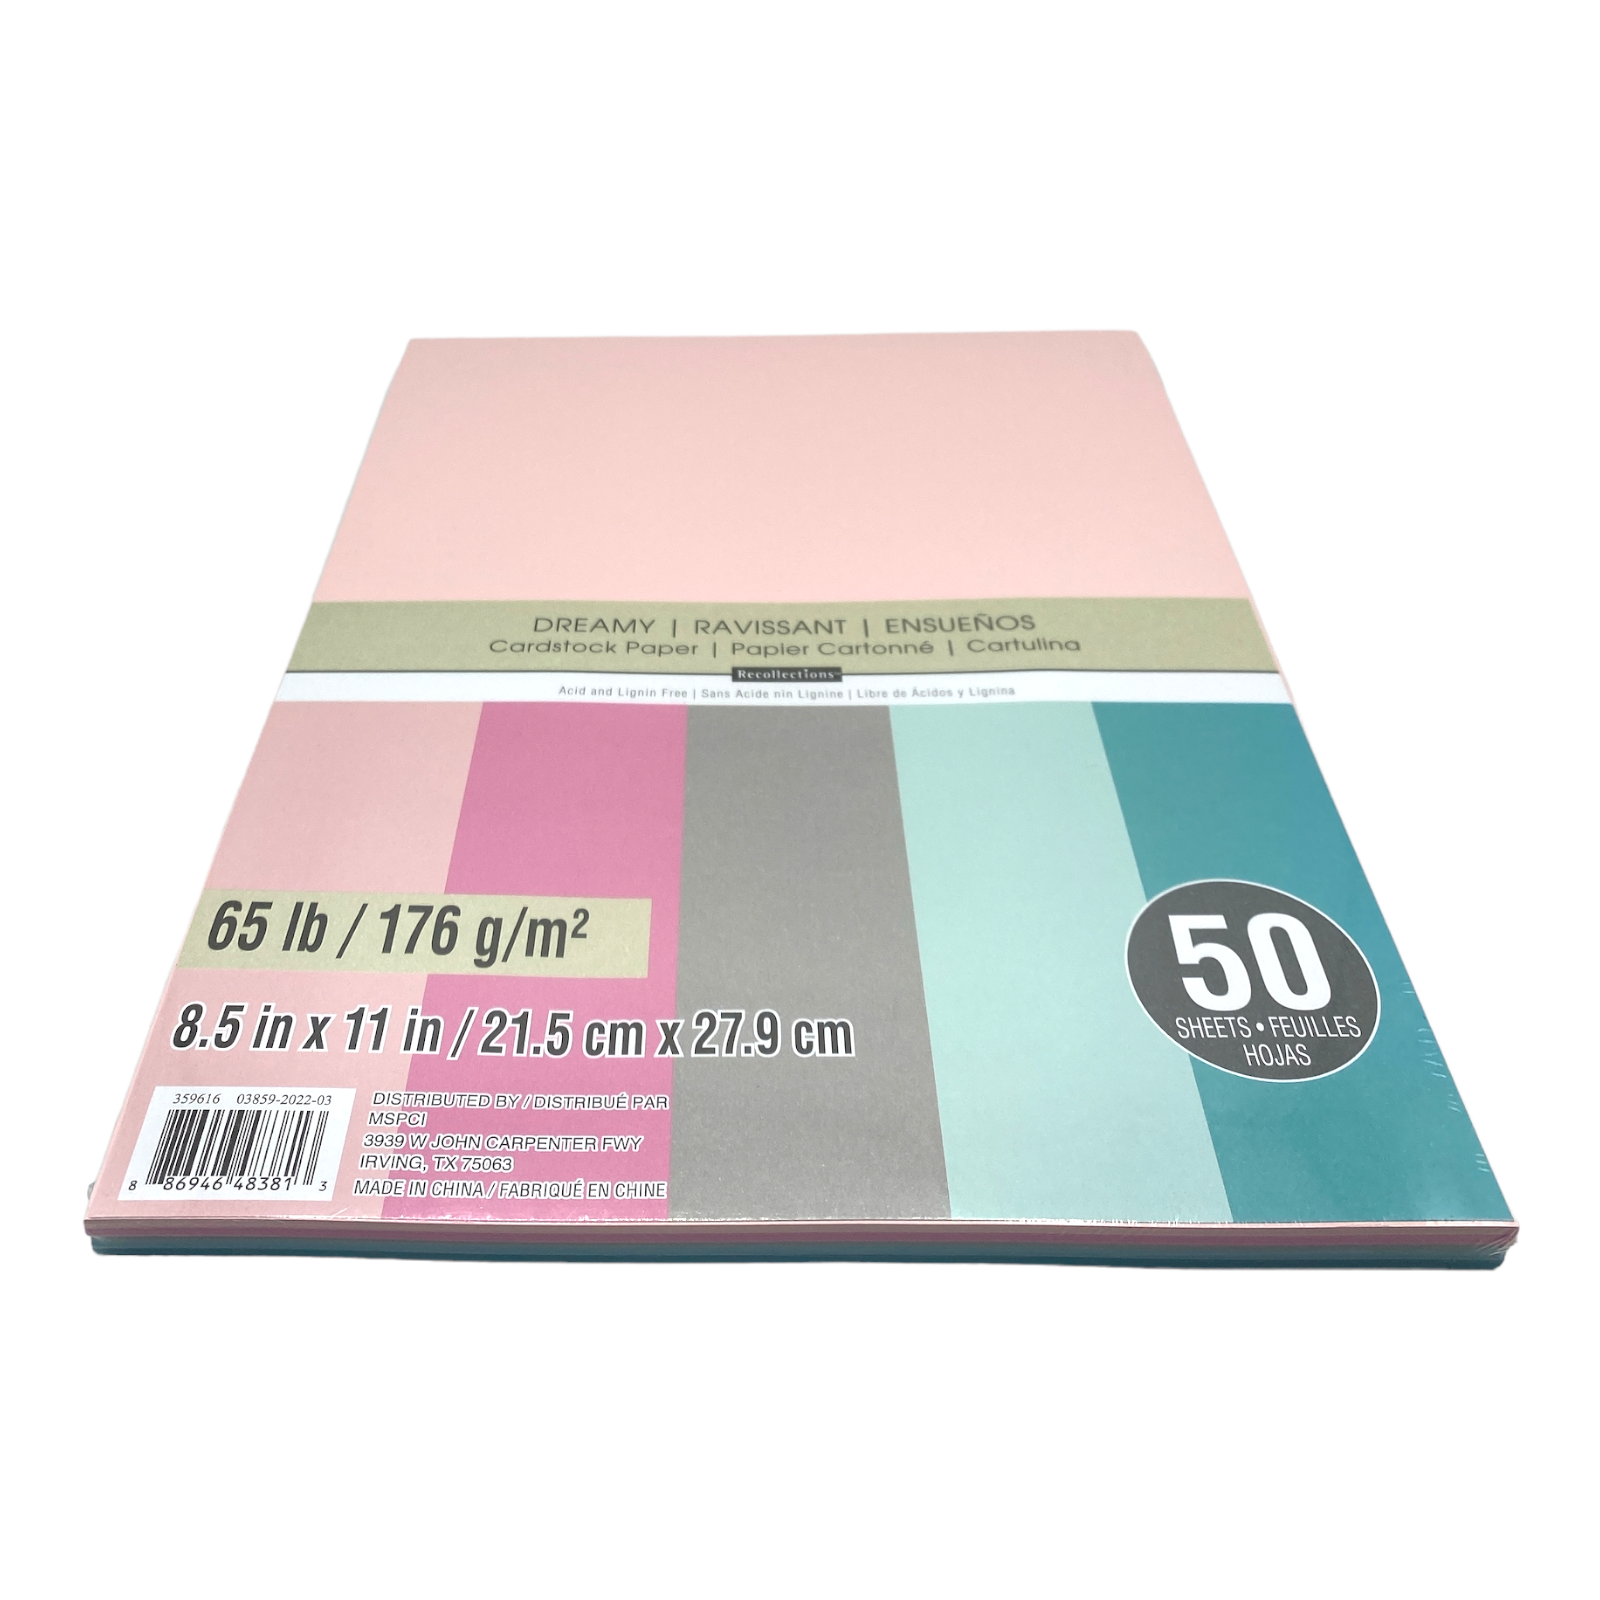 Recollections Cardstock Paper, 8 1/2 x 11 Dreamy - 50 Sheets